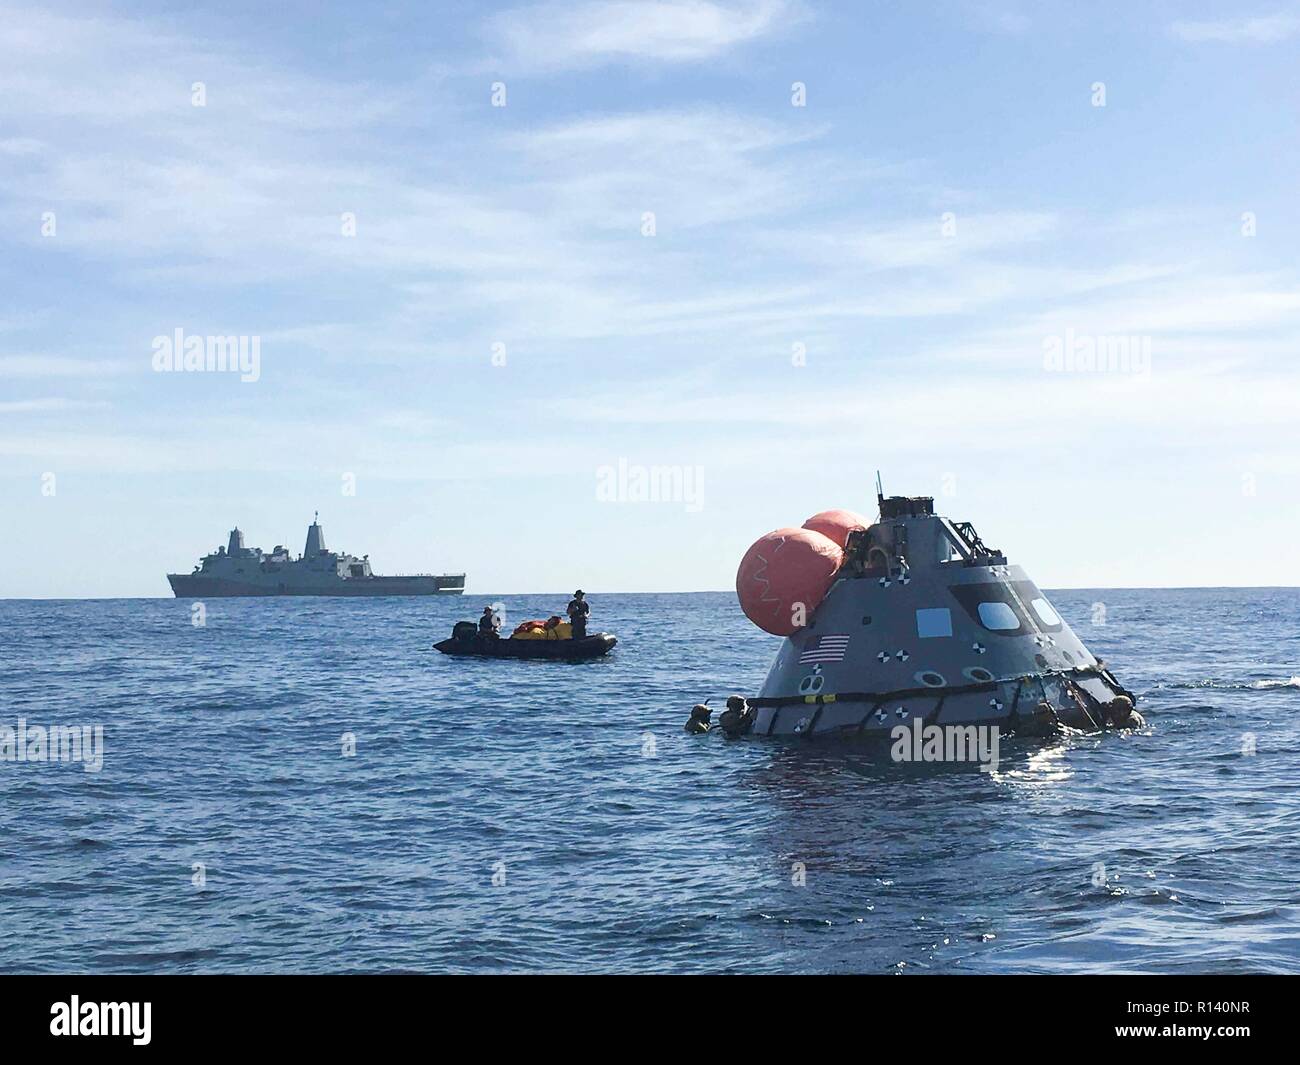 Sailors assigned to the amphibious transport dock ship USS John P. Murtha and NASA personnel retrieve a mock up version of the Orion space capsule during a recovery test November 7, 2018 in the Pacific Ocean. NASA and the U.S. Navy has not performed open ocean recovery of a manned space capsule since the Apollo project in the 60's and are testing procedures and hardware that will be used to recover the Orion spacecraft after it splashes down in the Pacific Ocean following future deep space exploration missions. Stock Photo